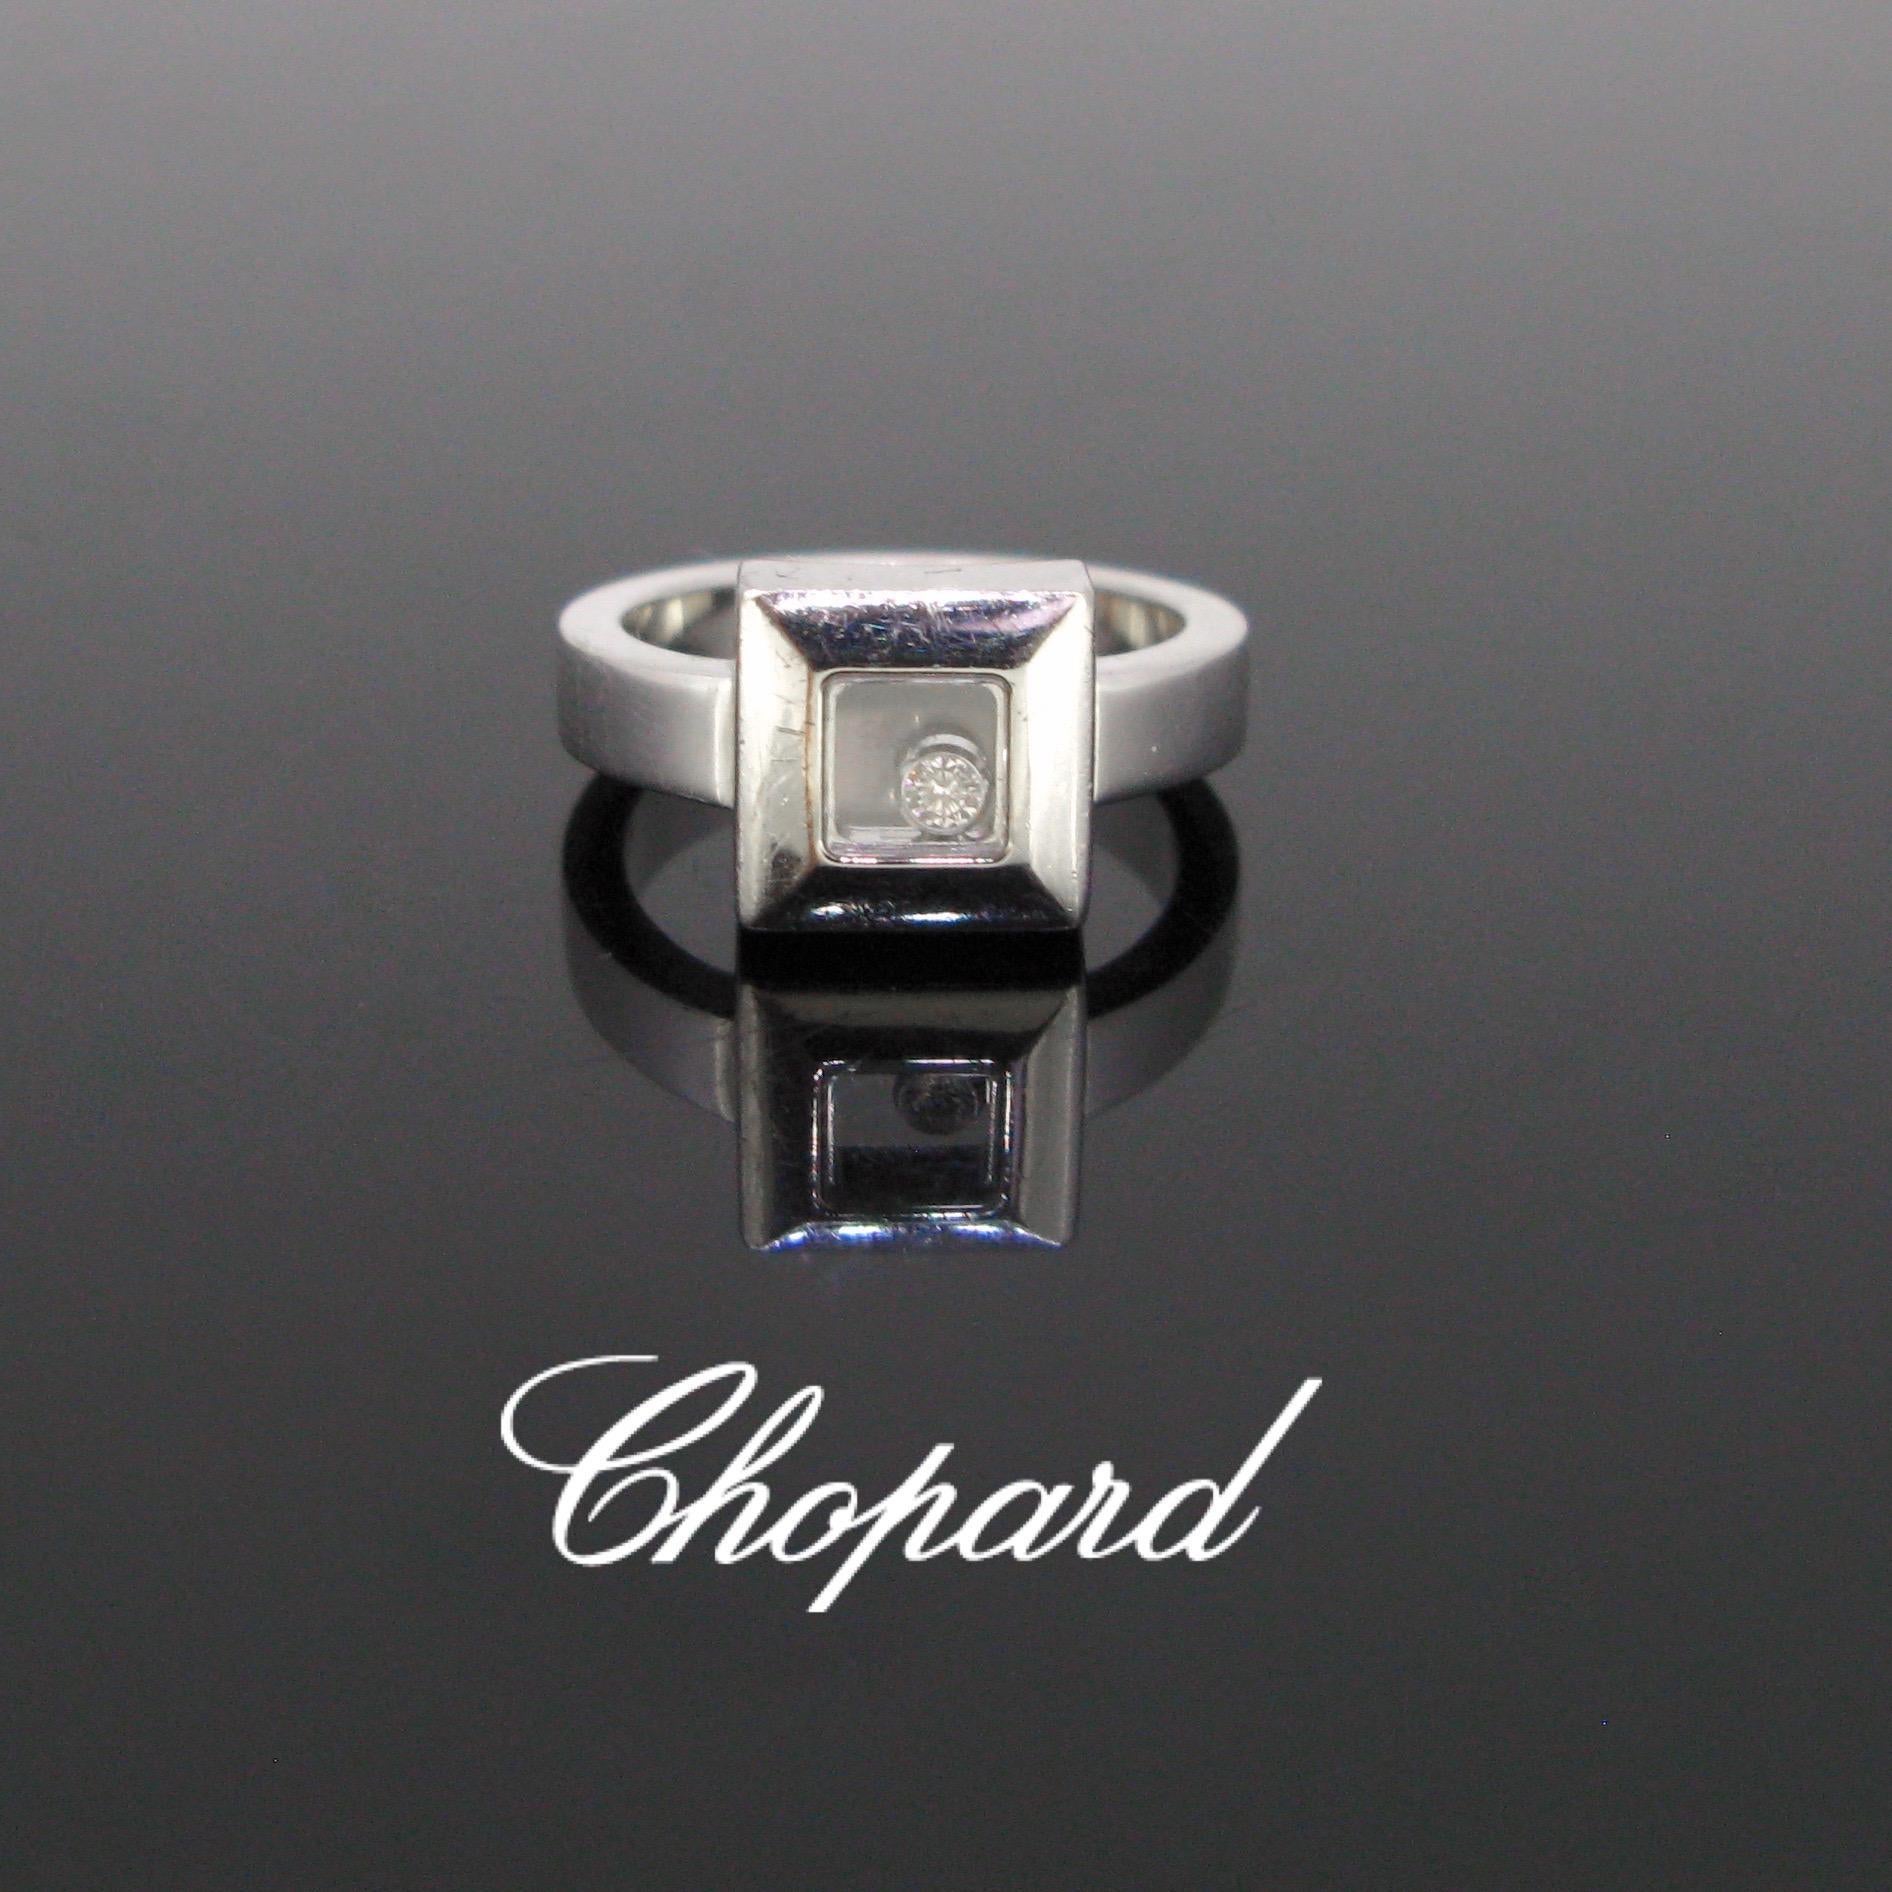 Weight:	11.72gr

Metal:		18kt white Gold

Stones:	1 diamond
•	Cut:	Brilliant
•	Carat:	0.05ct
•	Color:	F
•	Clarity:	VVS
	
Condition:	Very Good

Signature:	Chopard, nº 2982172 82/2938

Hallmarks:	Swiss

Comments:	This ring from Chopard is from the